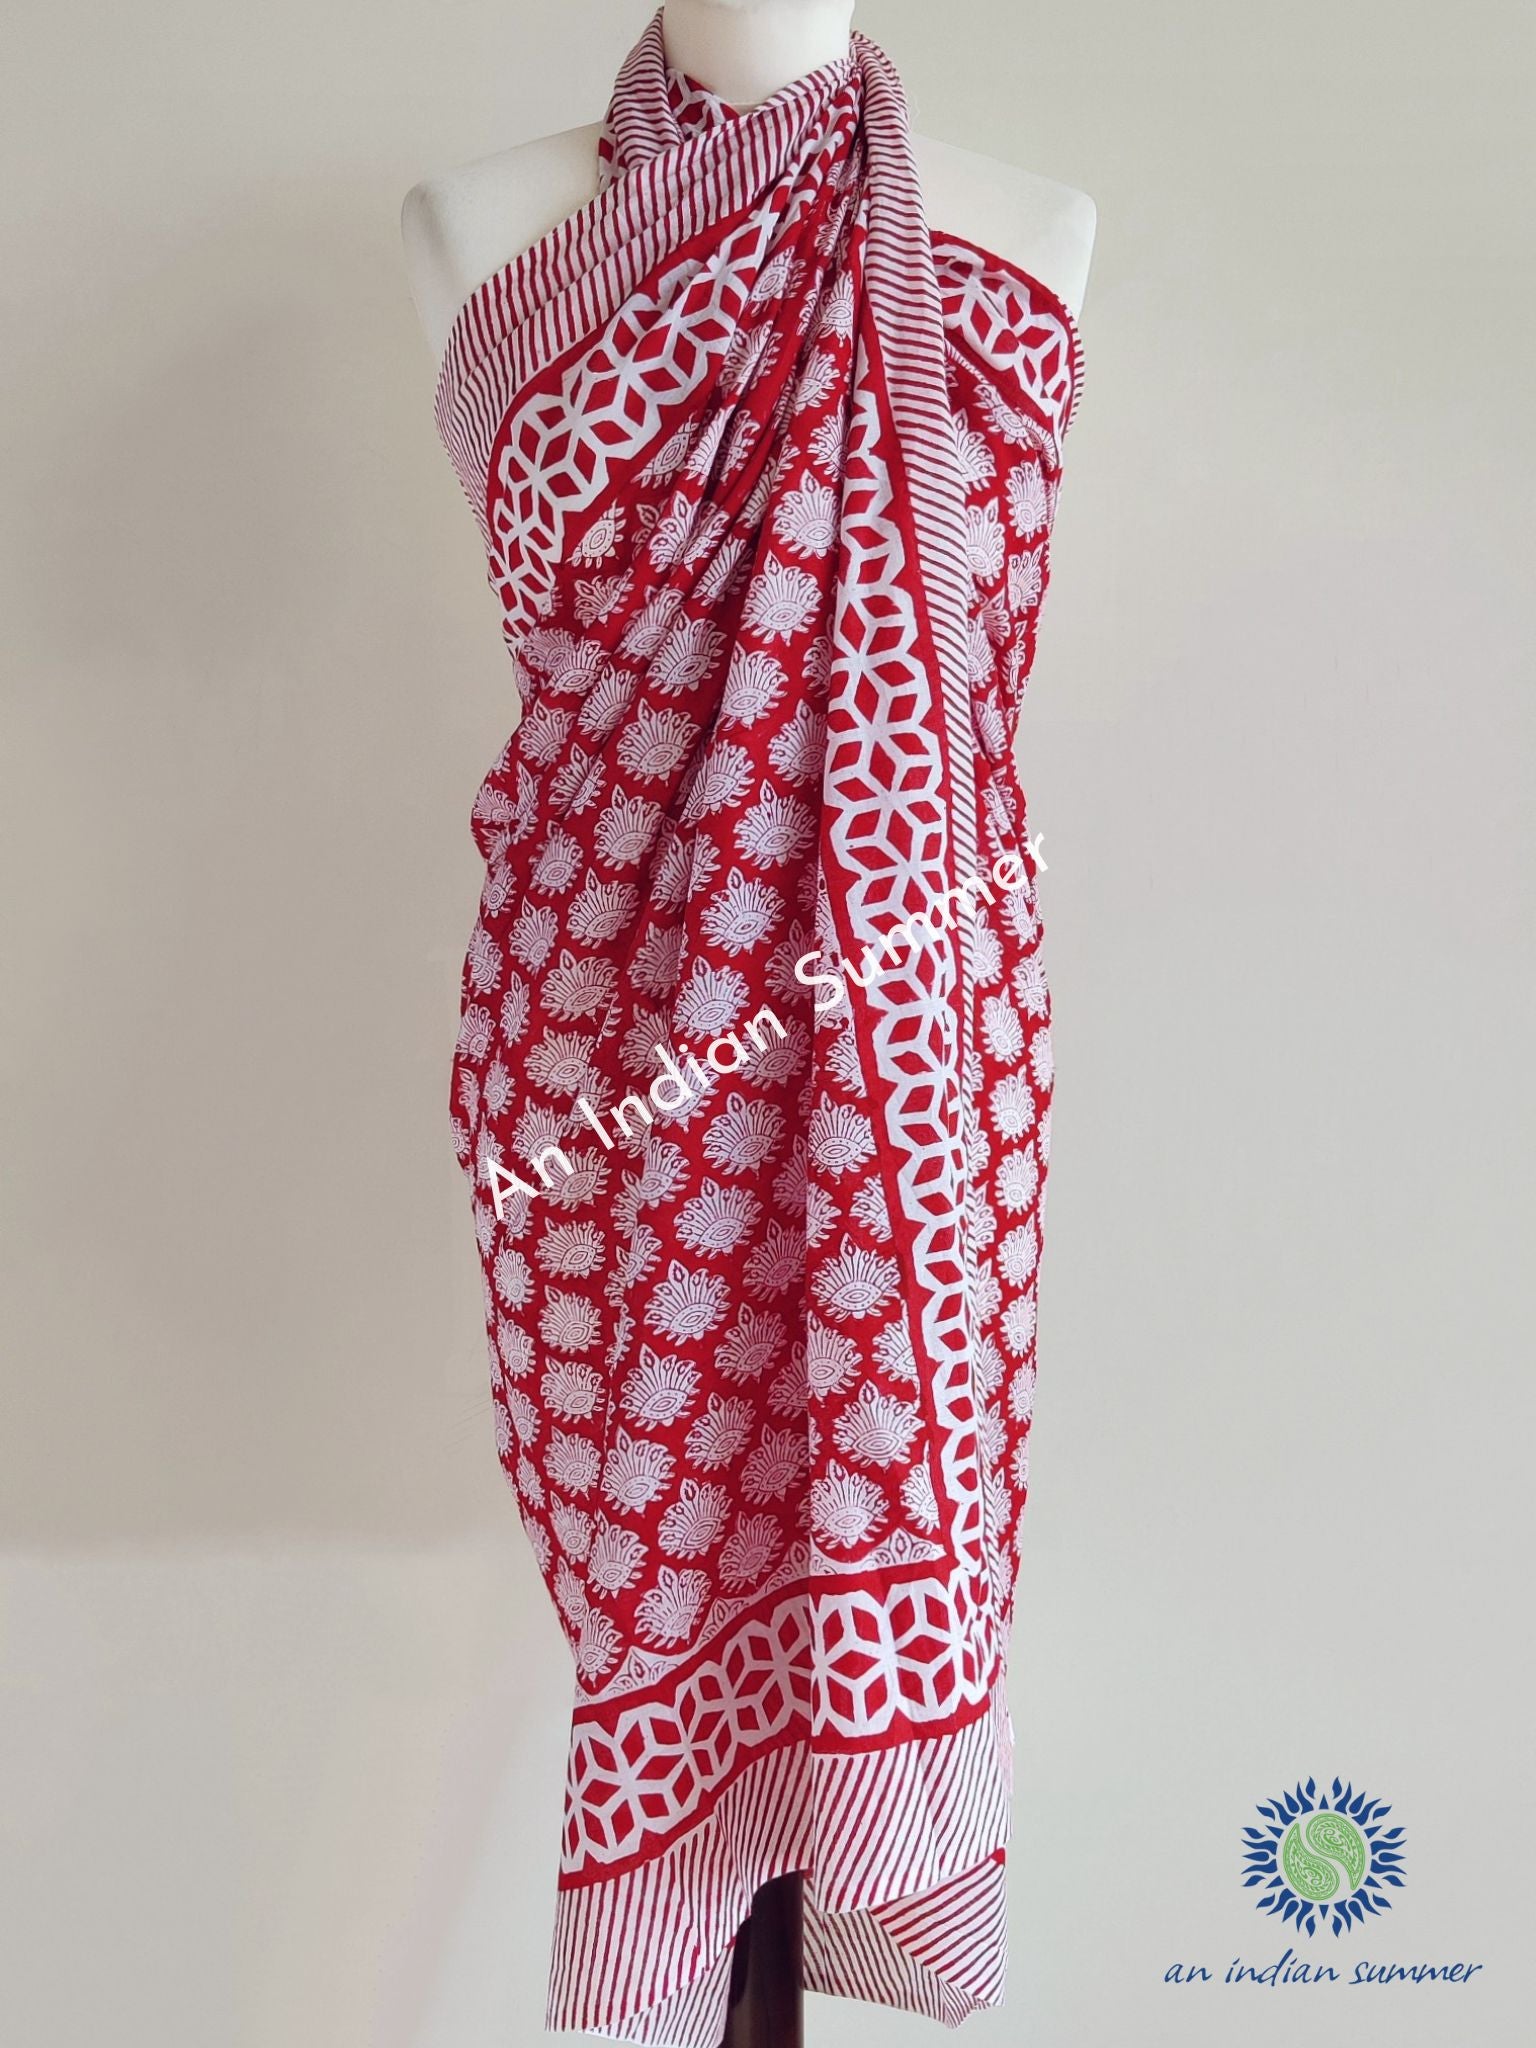 Fern Sarong Pareo | Red | Hand Block Printed | Soft Cotton Voile | An Indian Summer | Seasonless Timeless Sustainable Ethical Authentic Artisan Conscious Clothing Lifestyle Brand